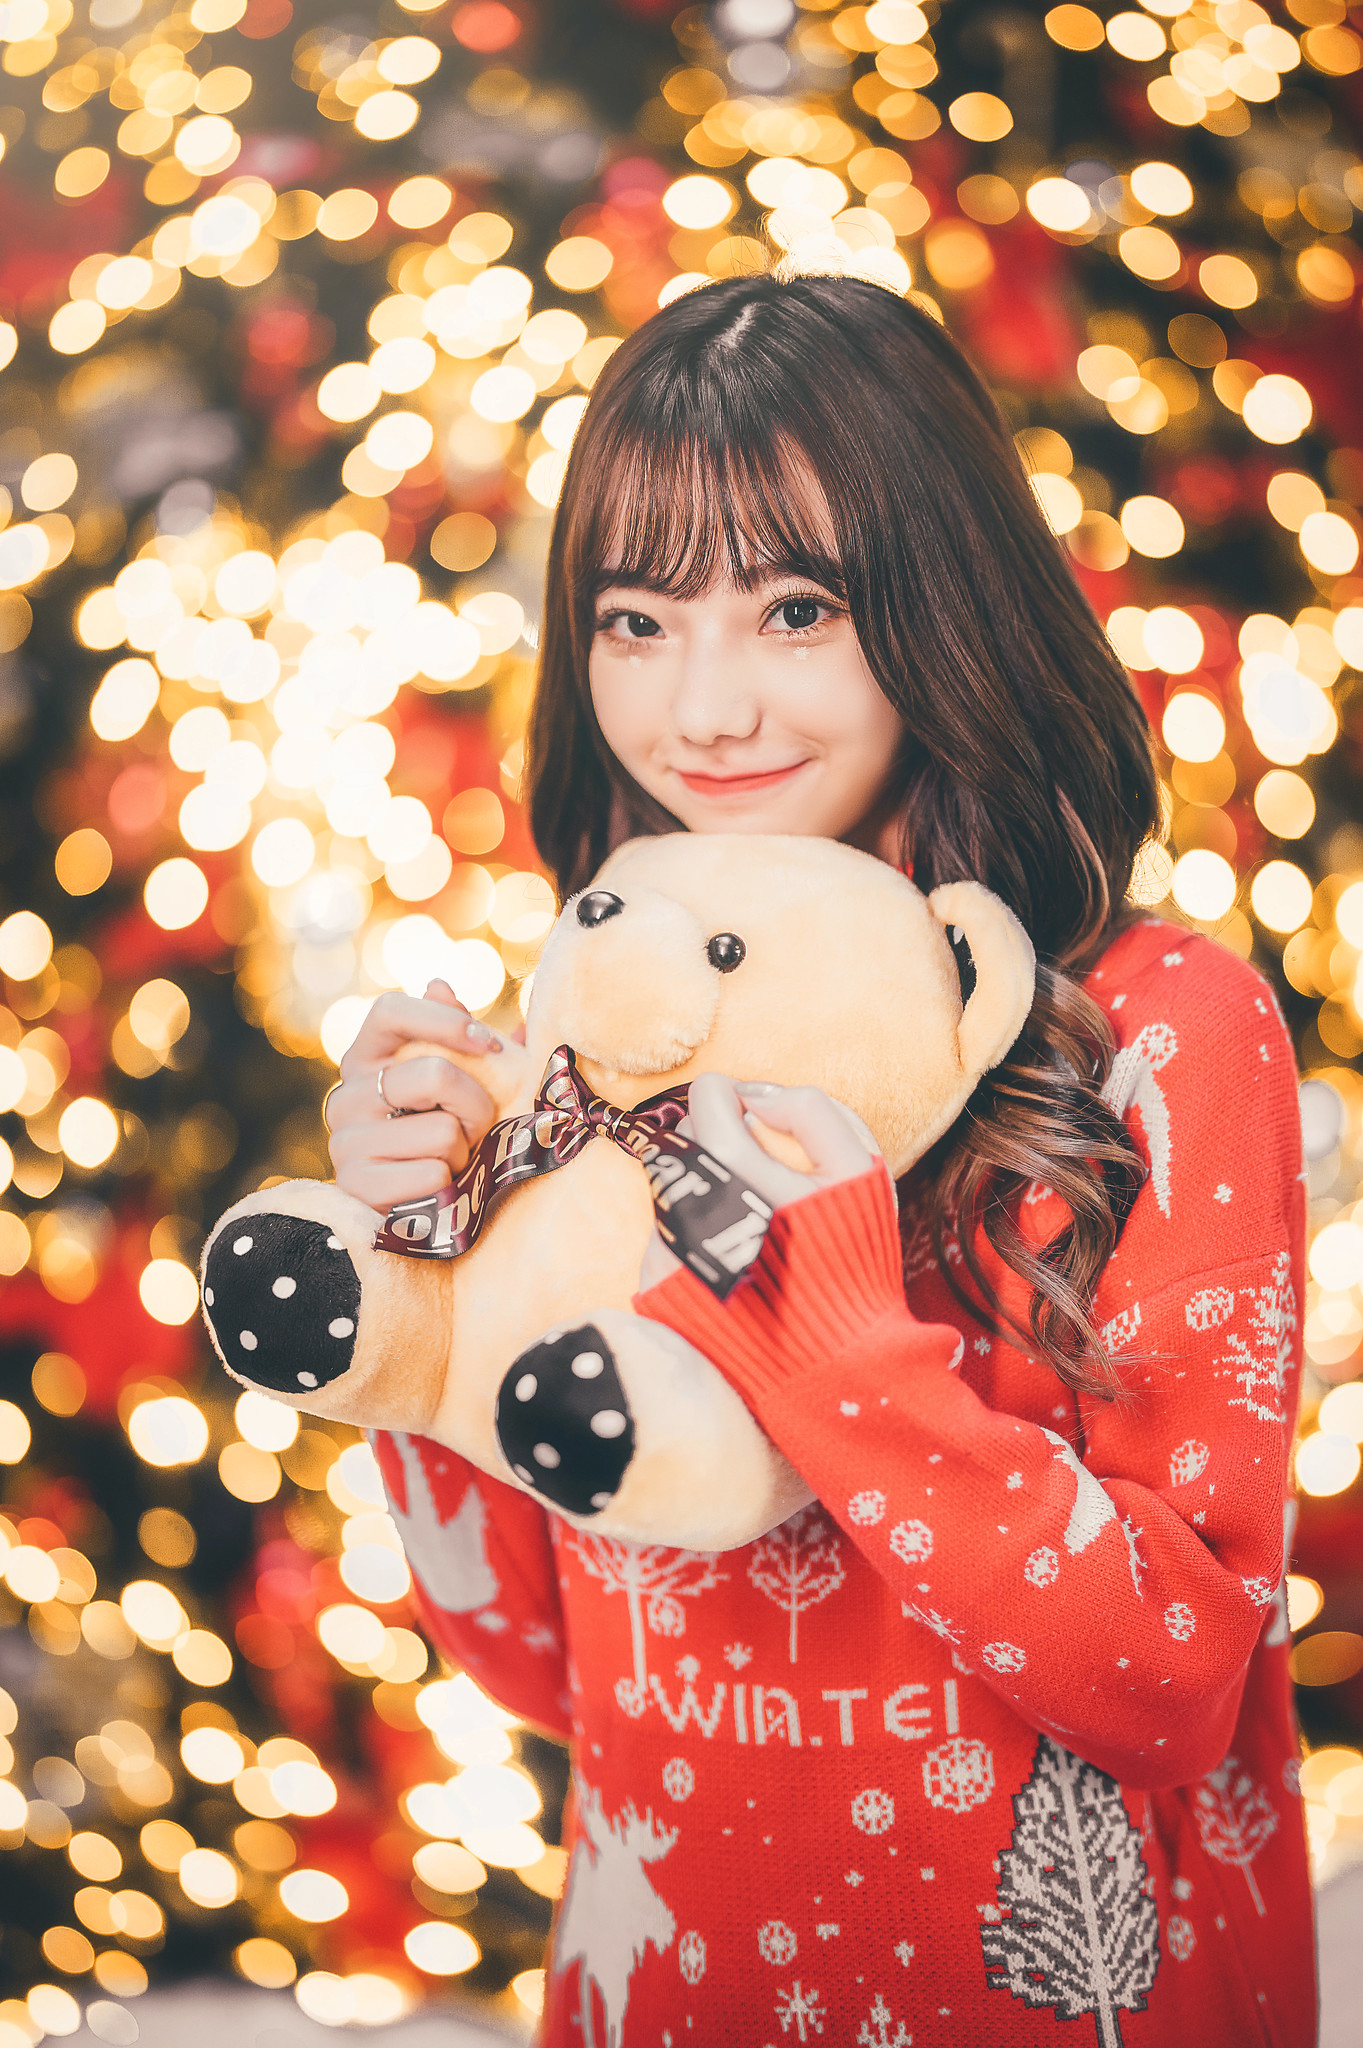 Asian Women Model Plush Toy Teddy Bears Smiling Looking At Viewer Sweater Red Sweater Brunette Dark  1363x2048